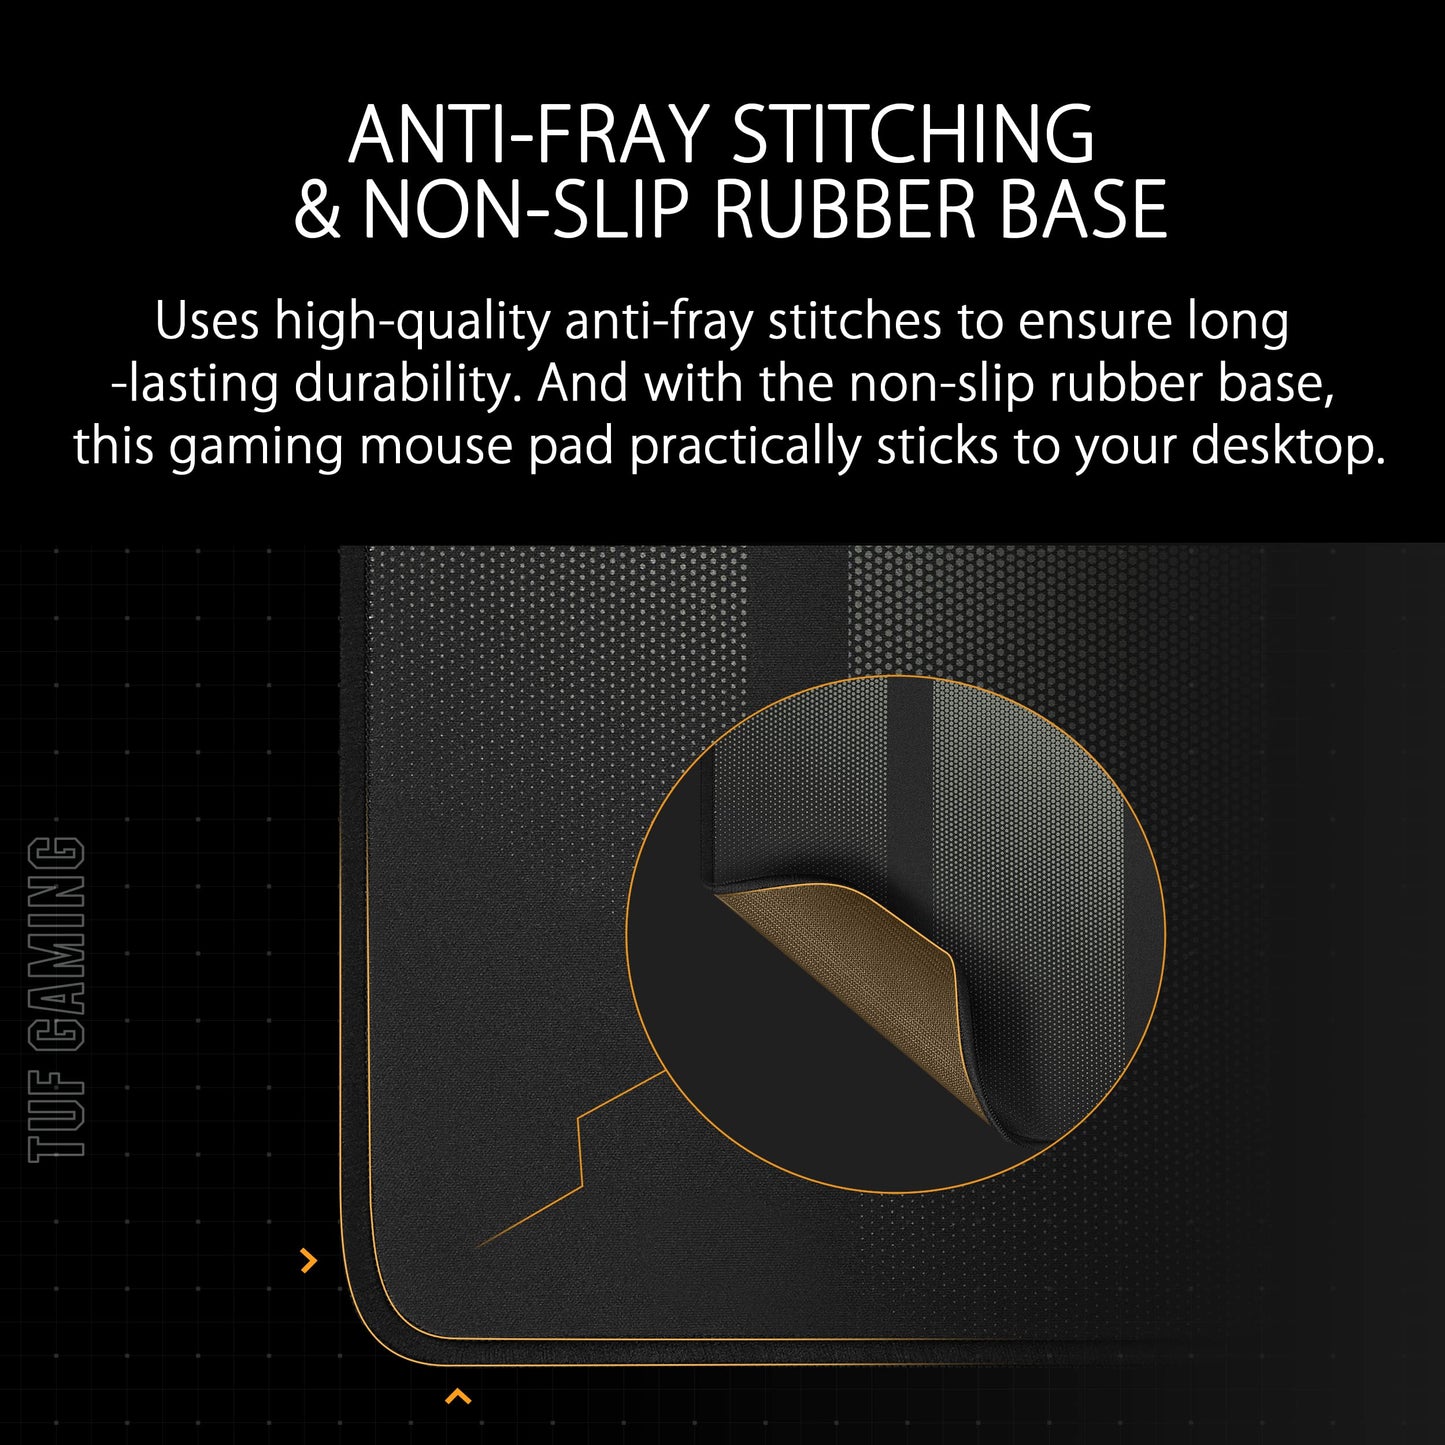 ASUS TUF Gaming P1 Portable Gaming Mouse Pad | Optimized Cloth Surface, Nano-Coated, Water-Resistant, Durable Anti-fray Stitching, and Non-Slip Rubber Base